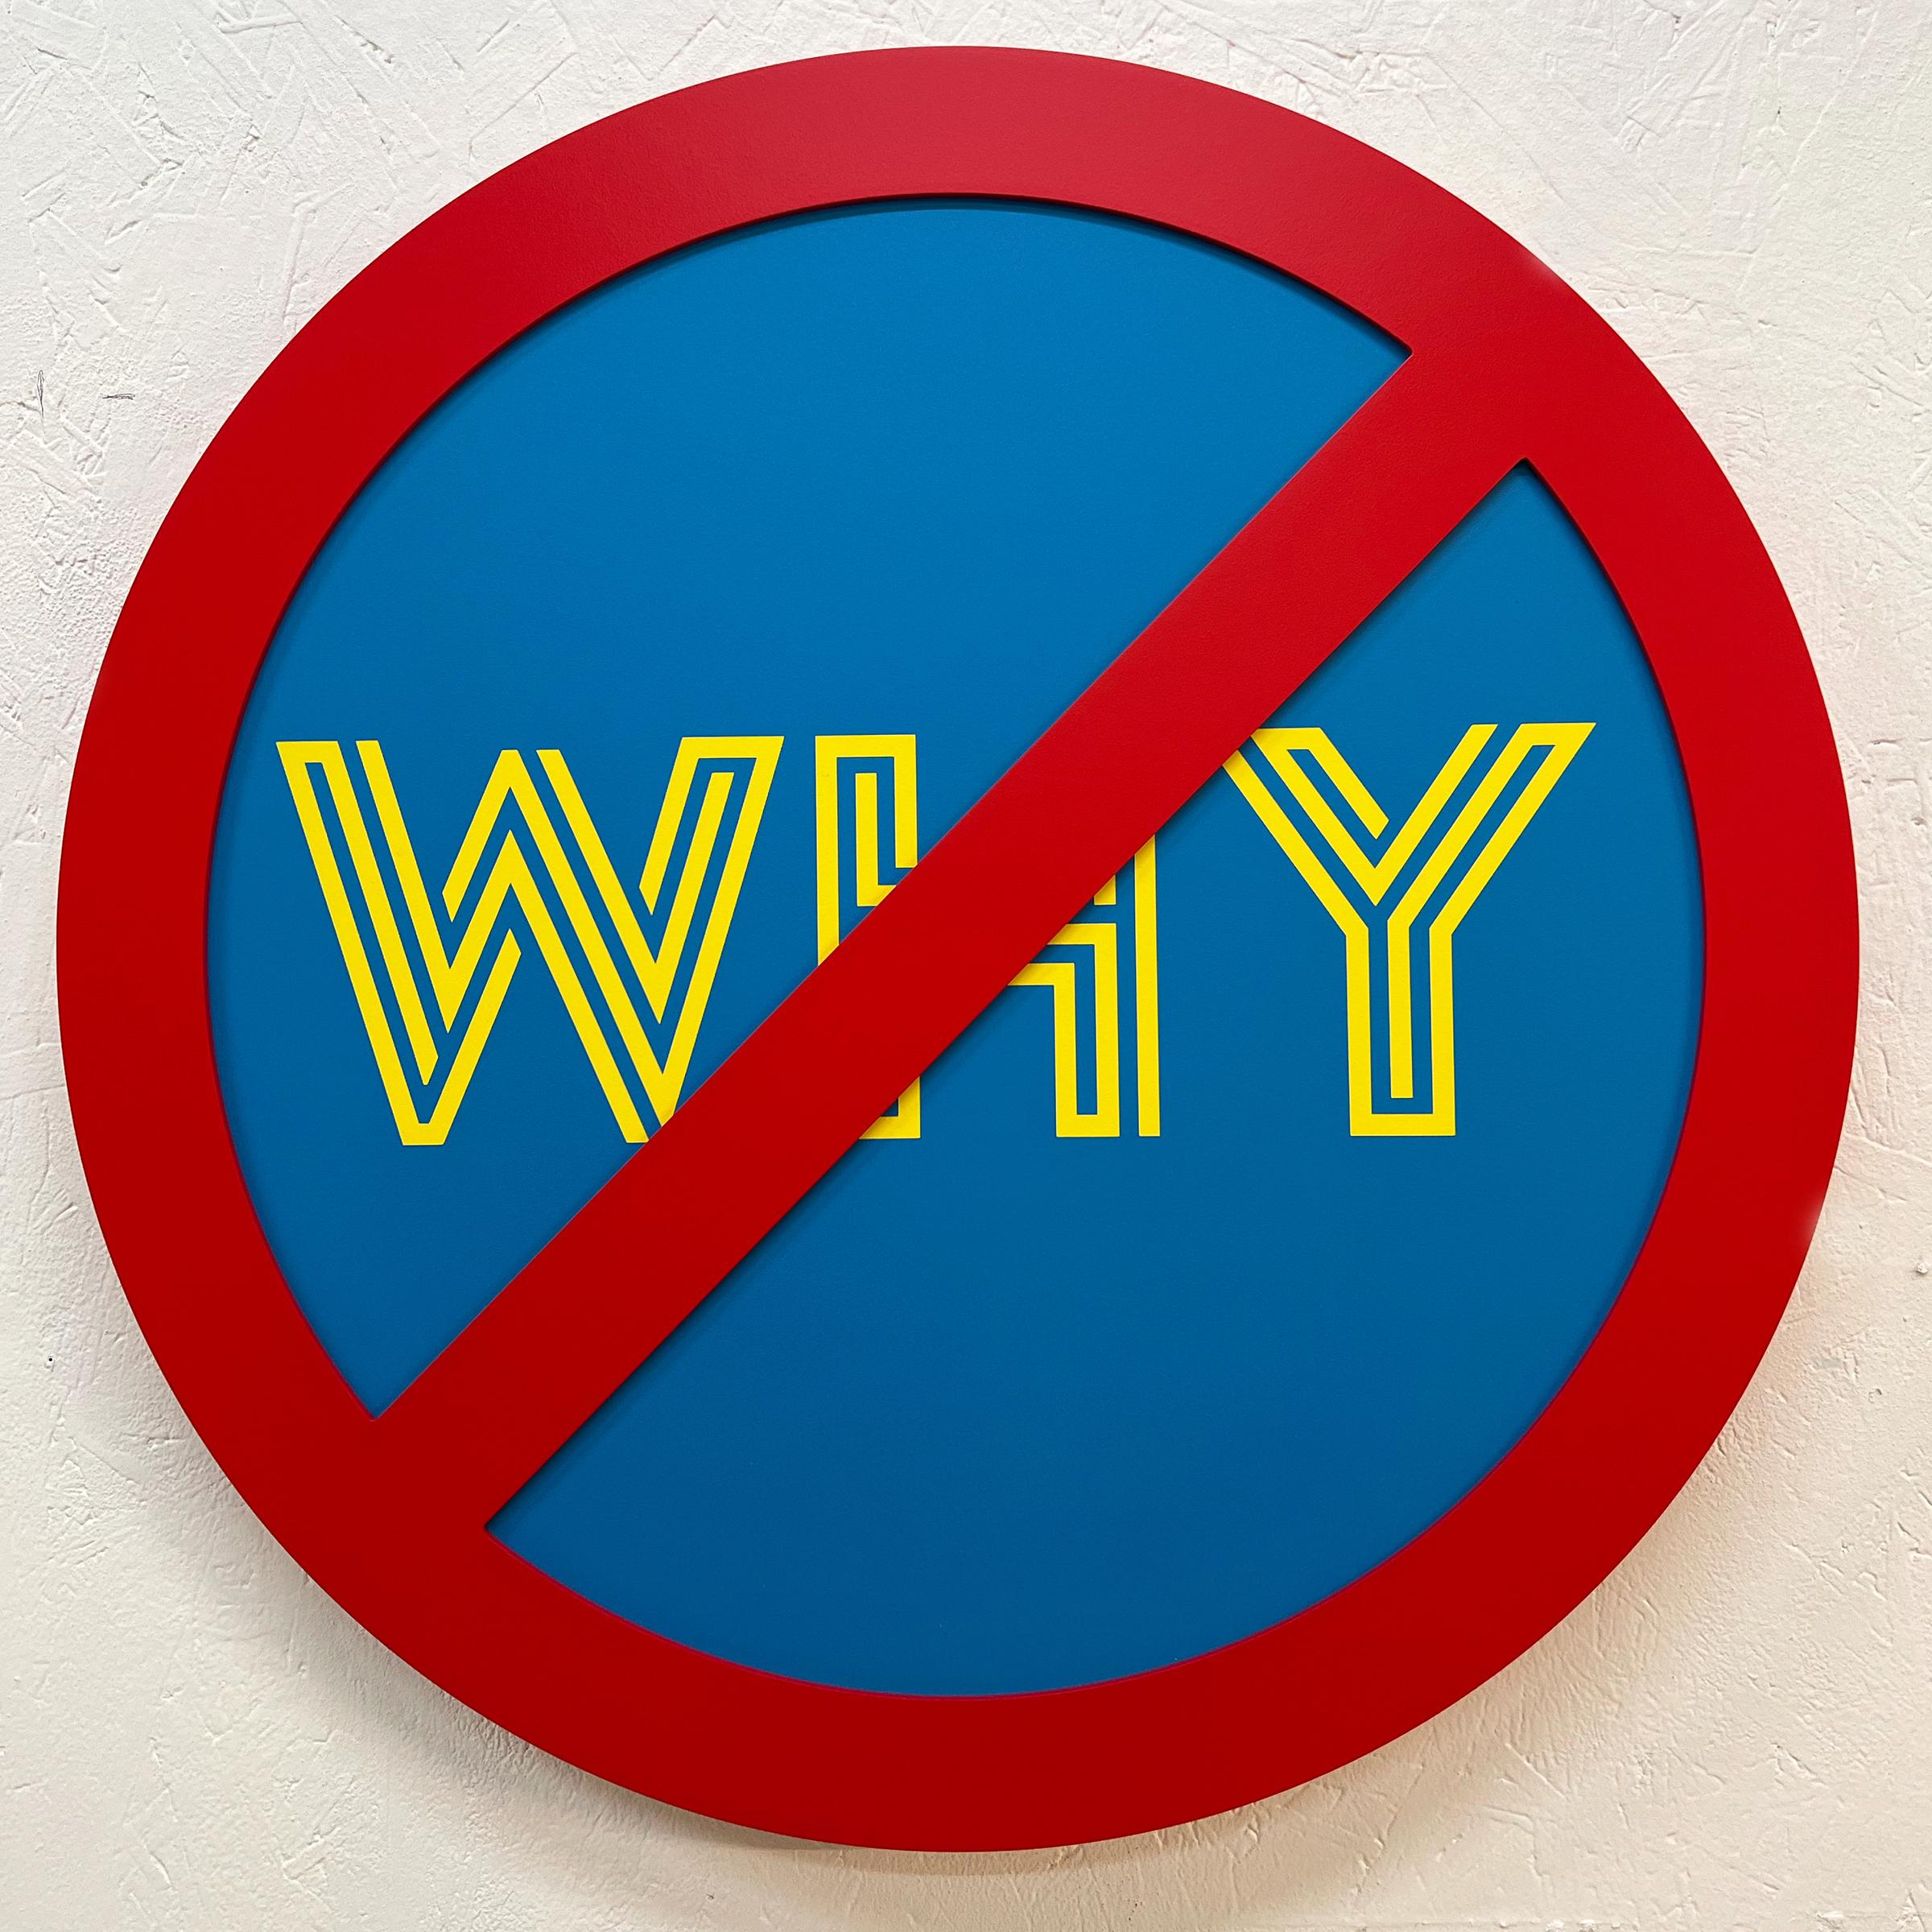 Michael Porten Portrait Painting - "No Why (Yellow on Blue)" - conceptual art, wall sculpture - Lawrence Weiner